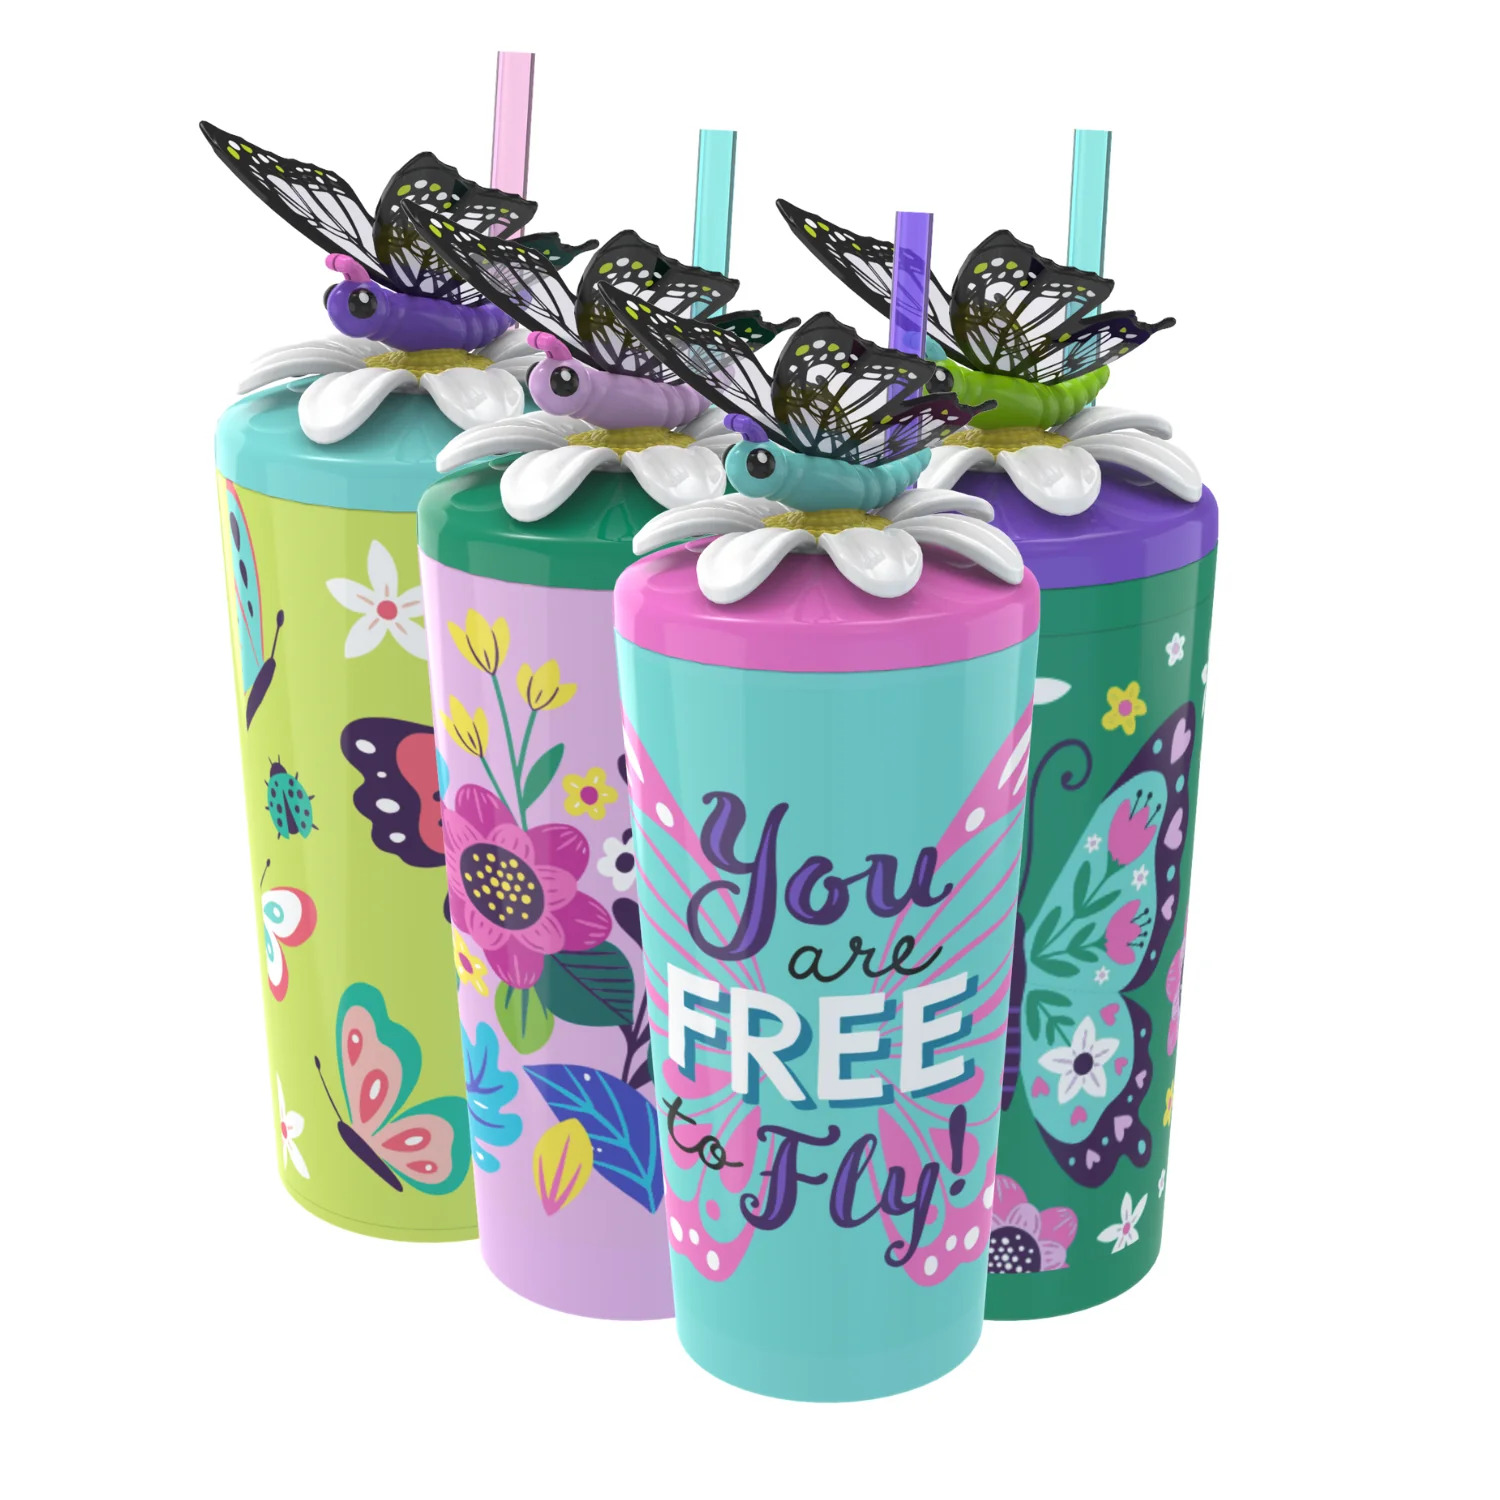 Cool Gear 4-Pack 18 oz Fun Toppers Butterfly Character Lid Tumblers with straw included | Durable, Reusable Water Bottle Gift for Kids, Adults - image 1 of 5